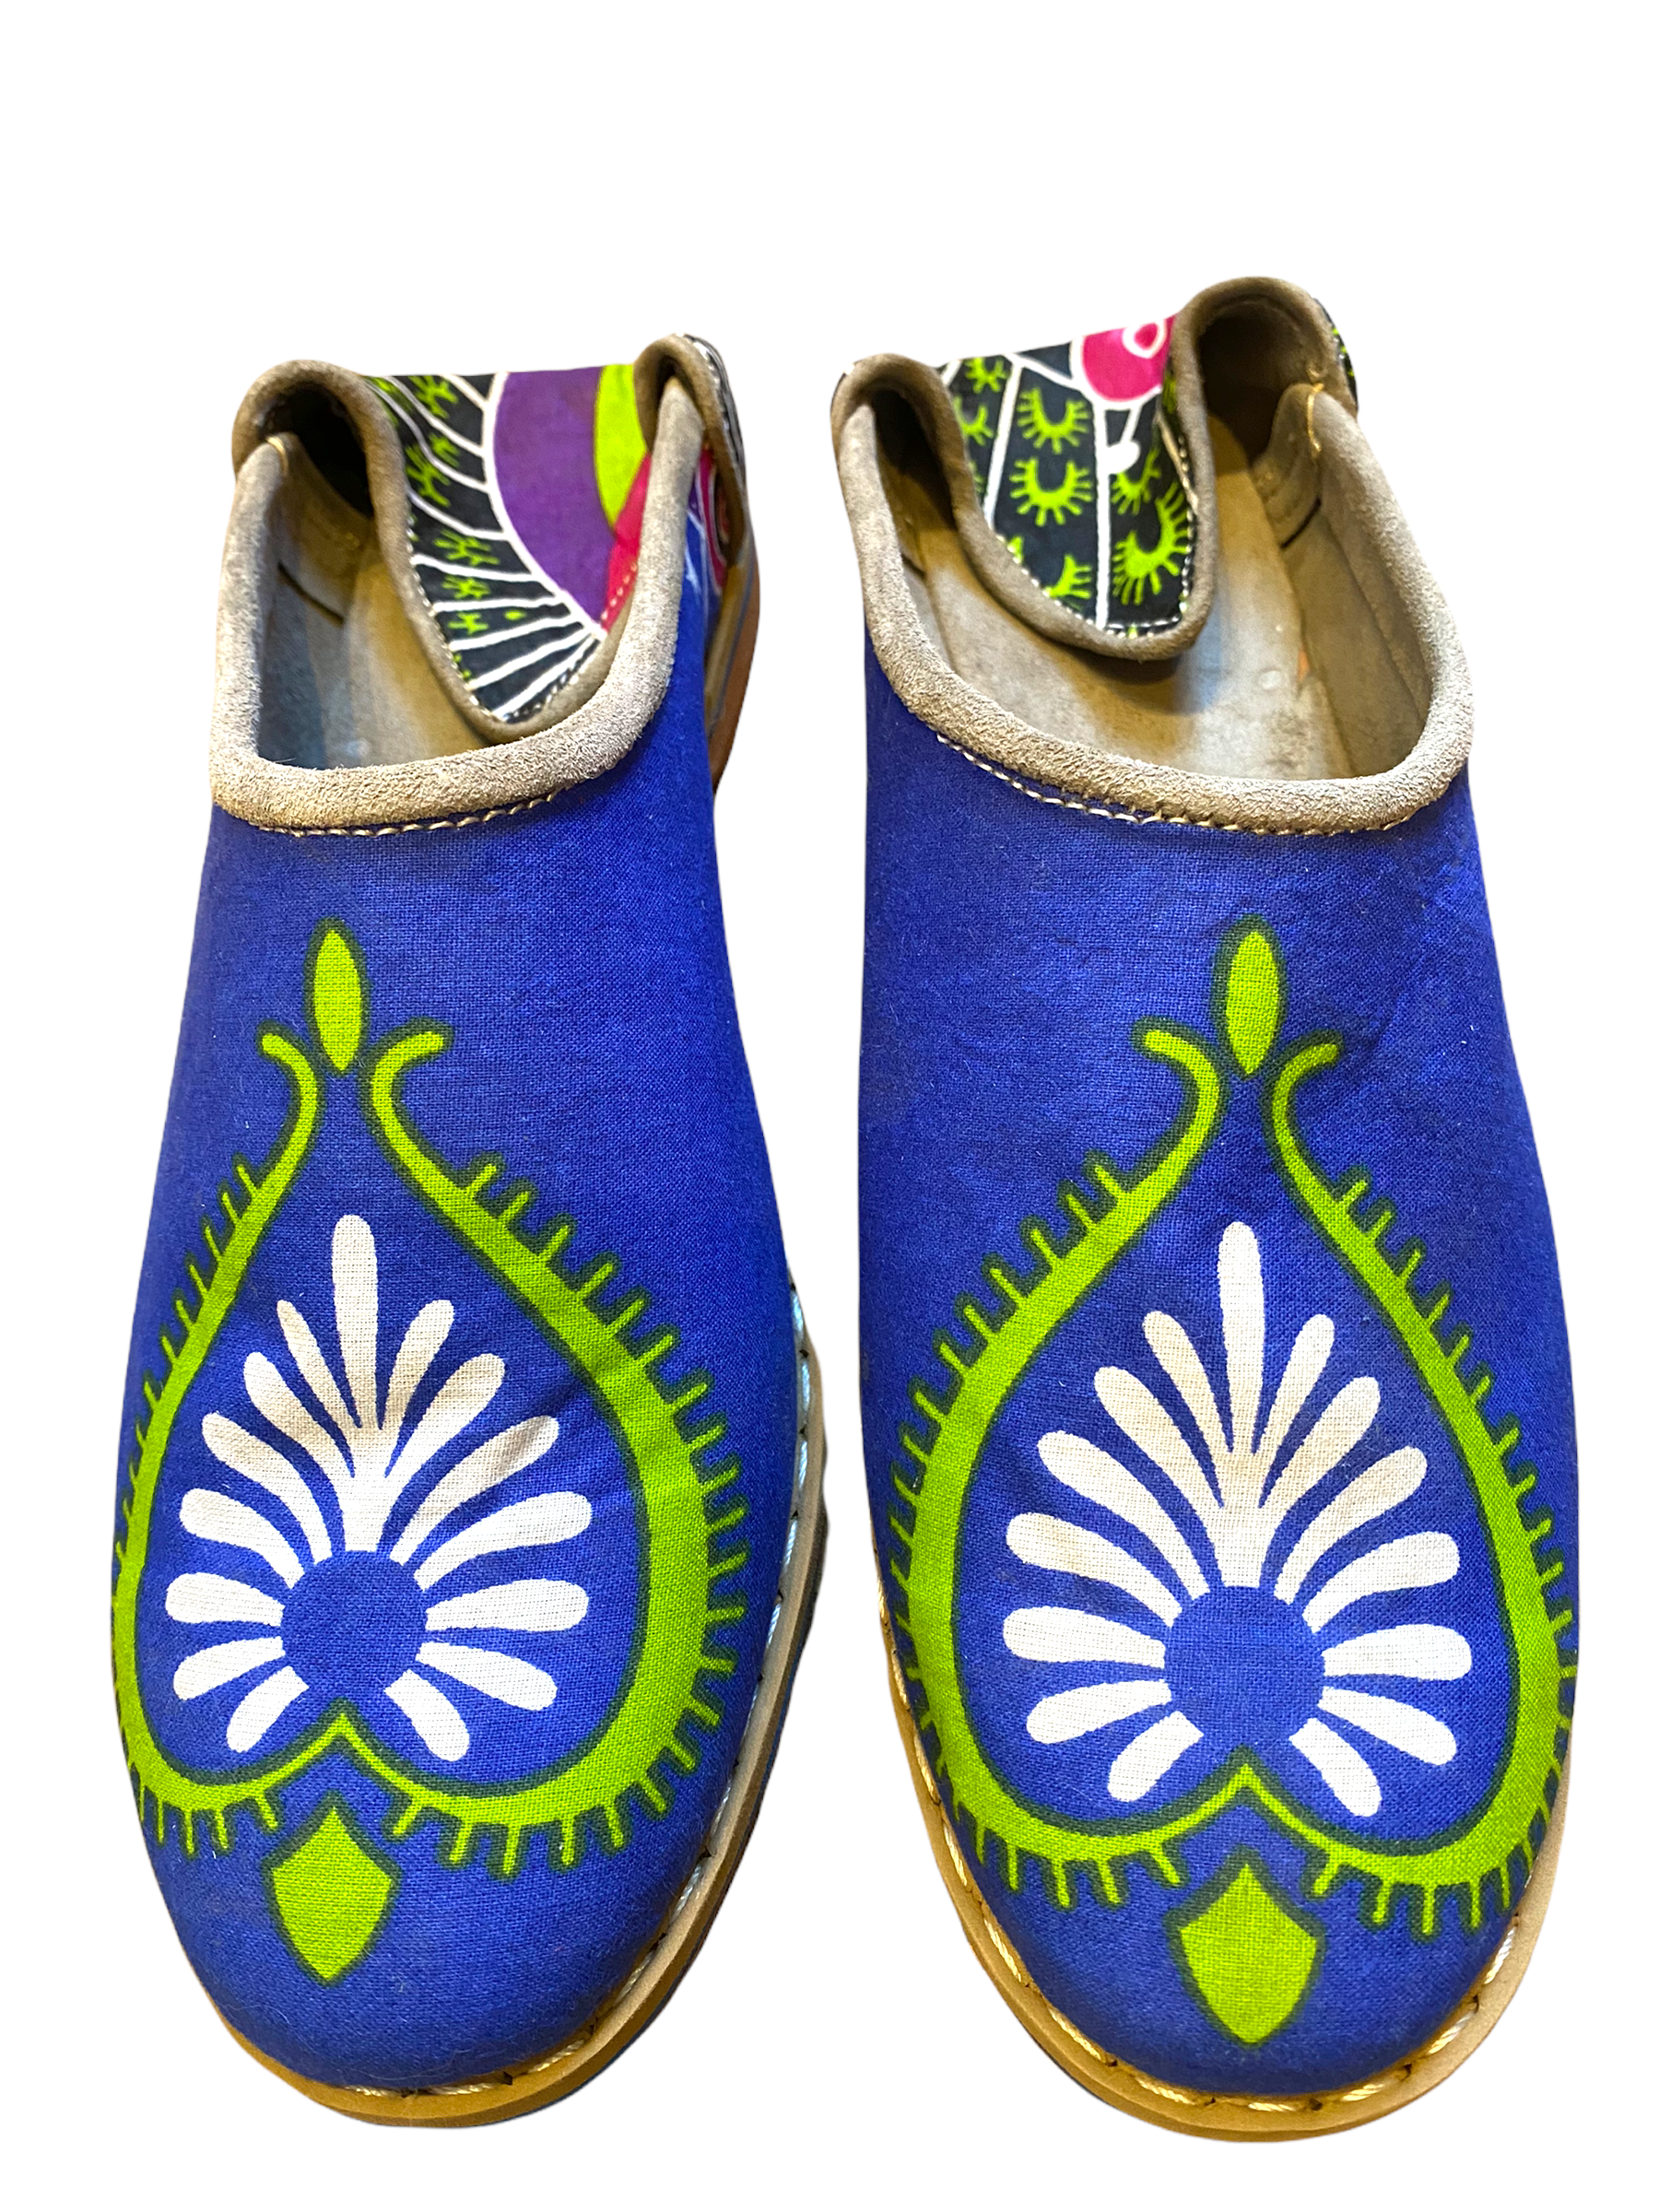 African Wax Babouche slippers in blue size EUR39 - UK6